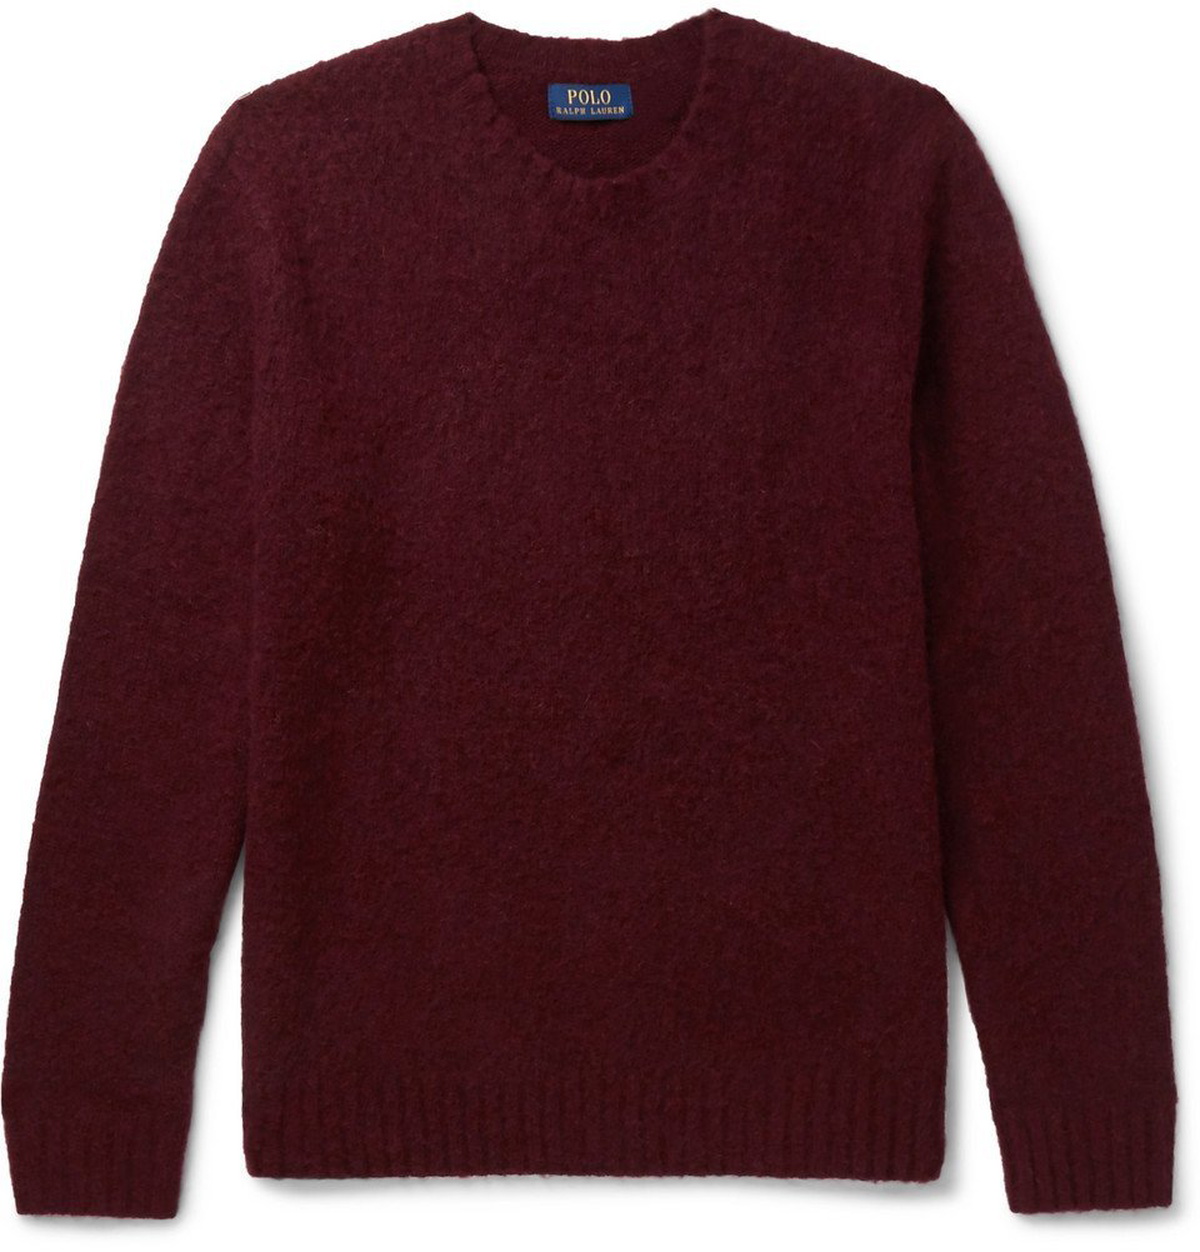 Golden Goose elbow-patch ribbed-knit jumper - Brown